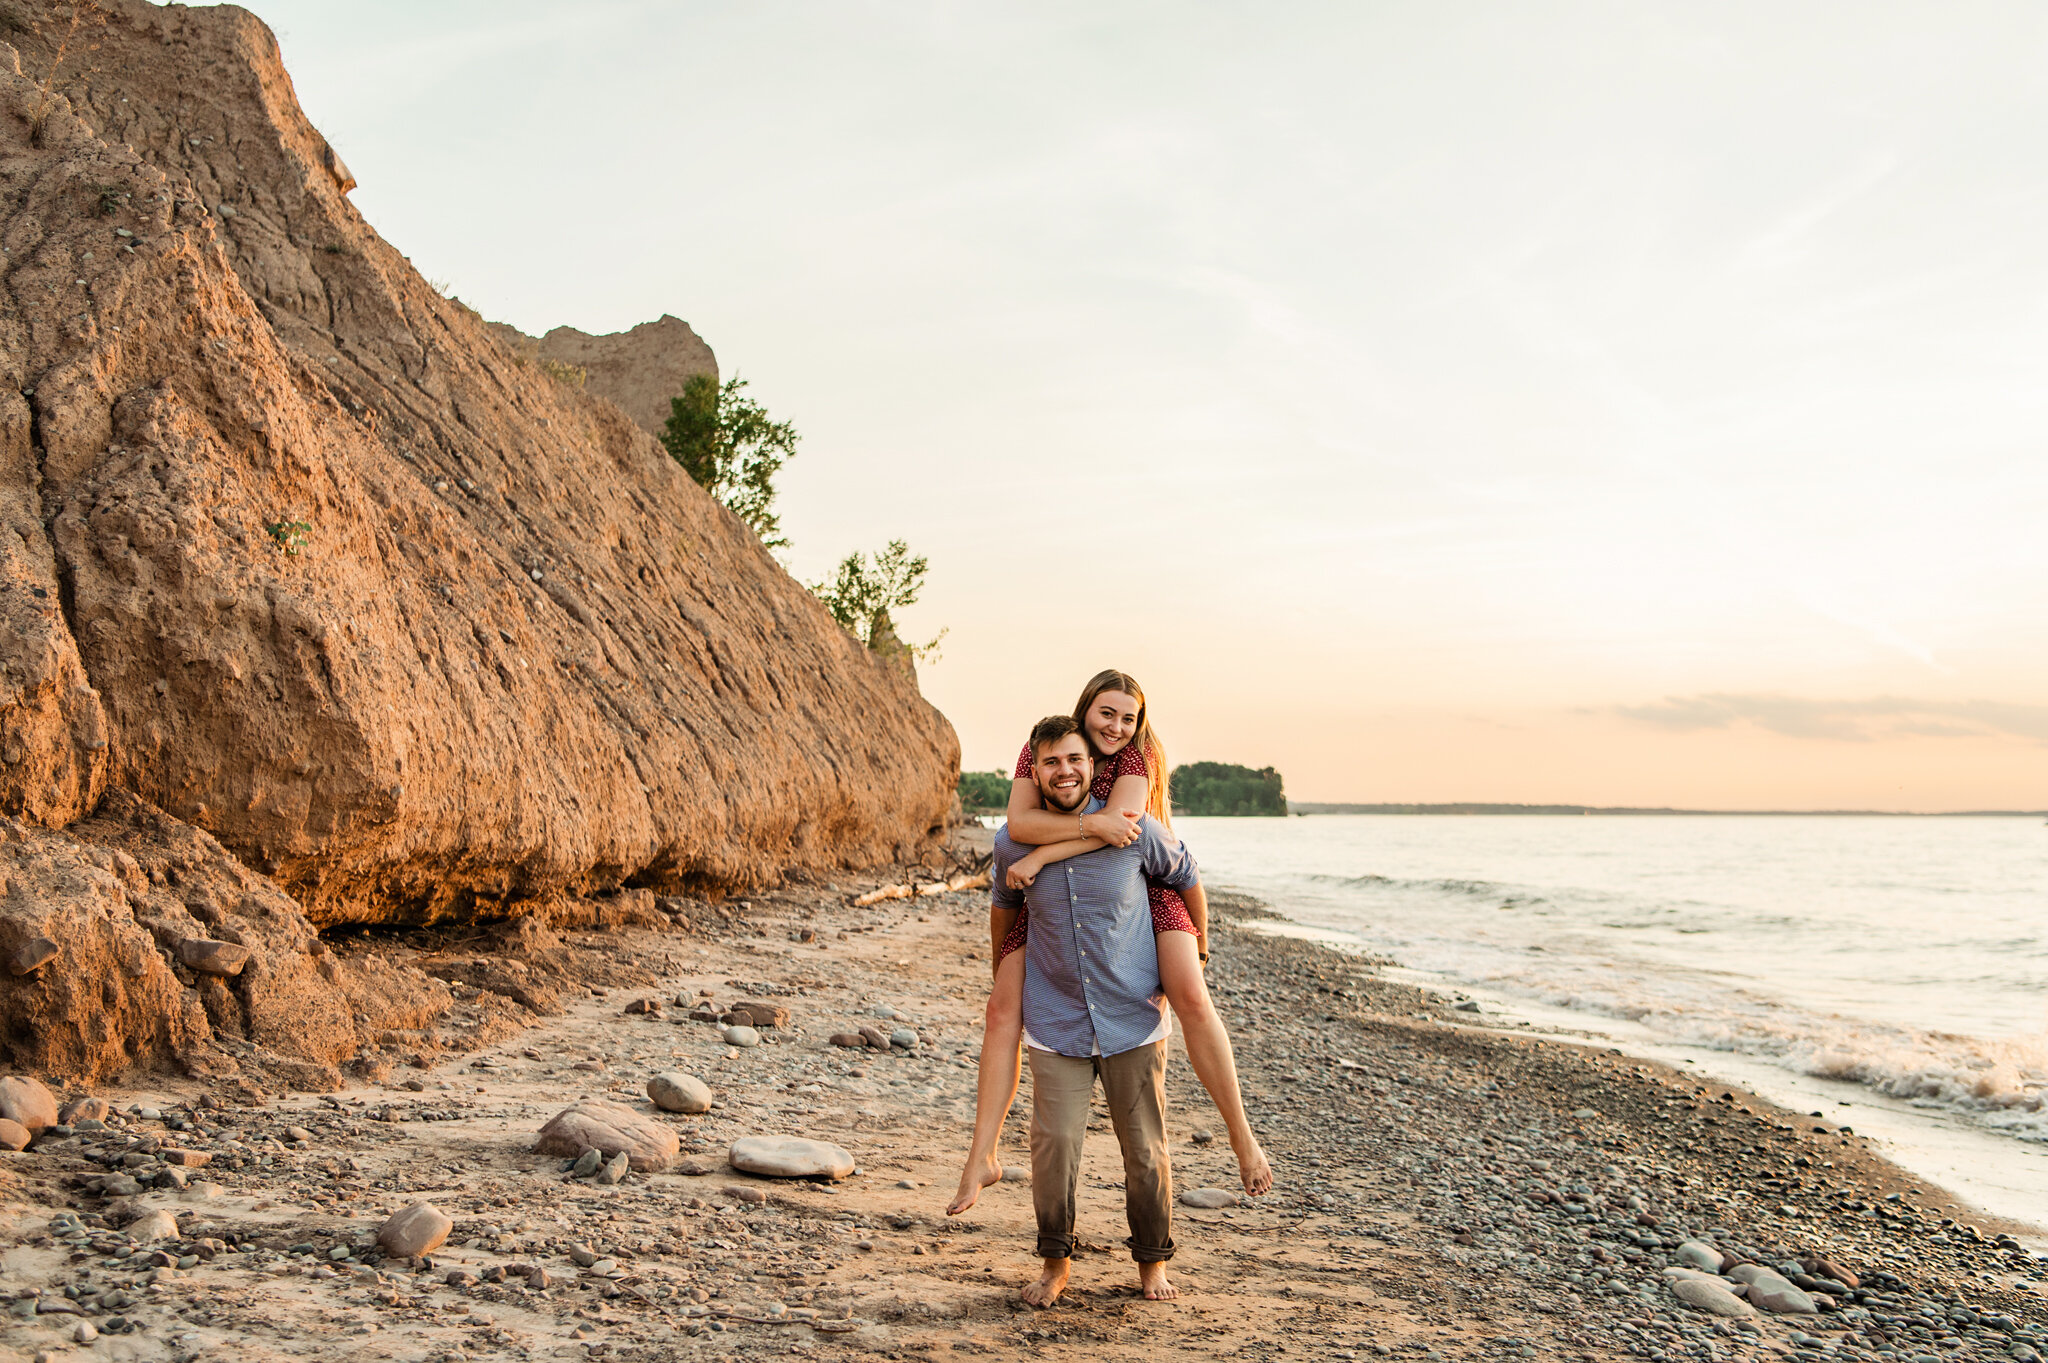 Chimney_Bluffs_State_Park_Rochester_Engagement_Session_JILL_STUDIO_Rochester_NY_Photographer_7175.jpg